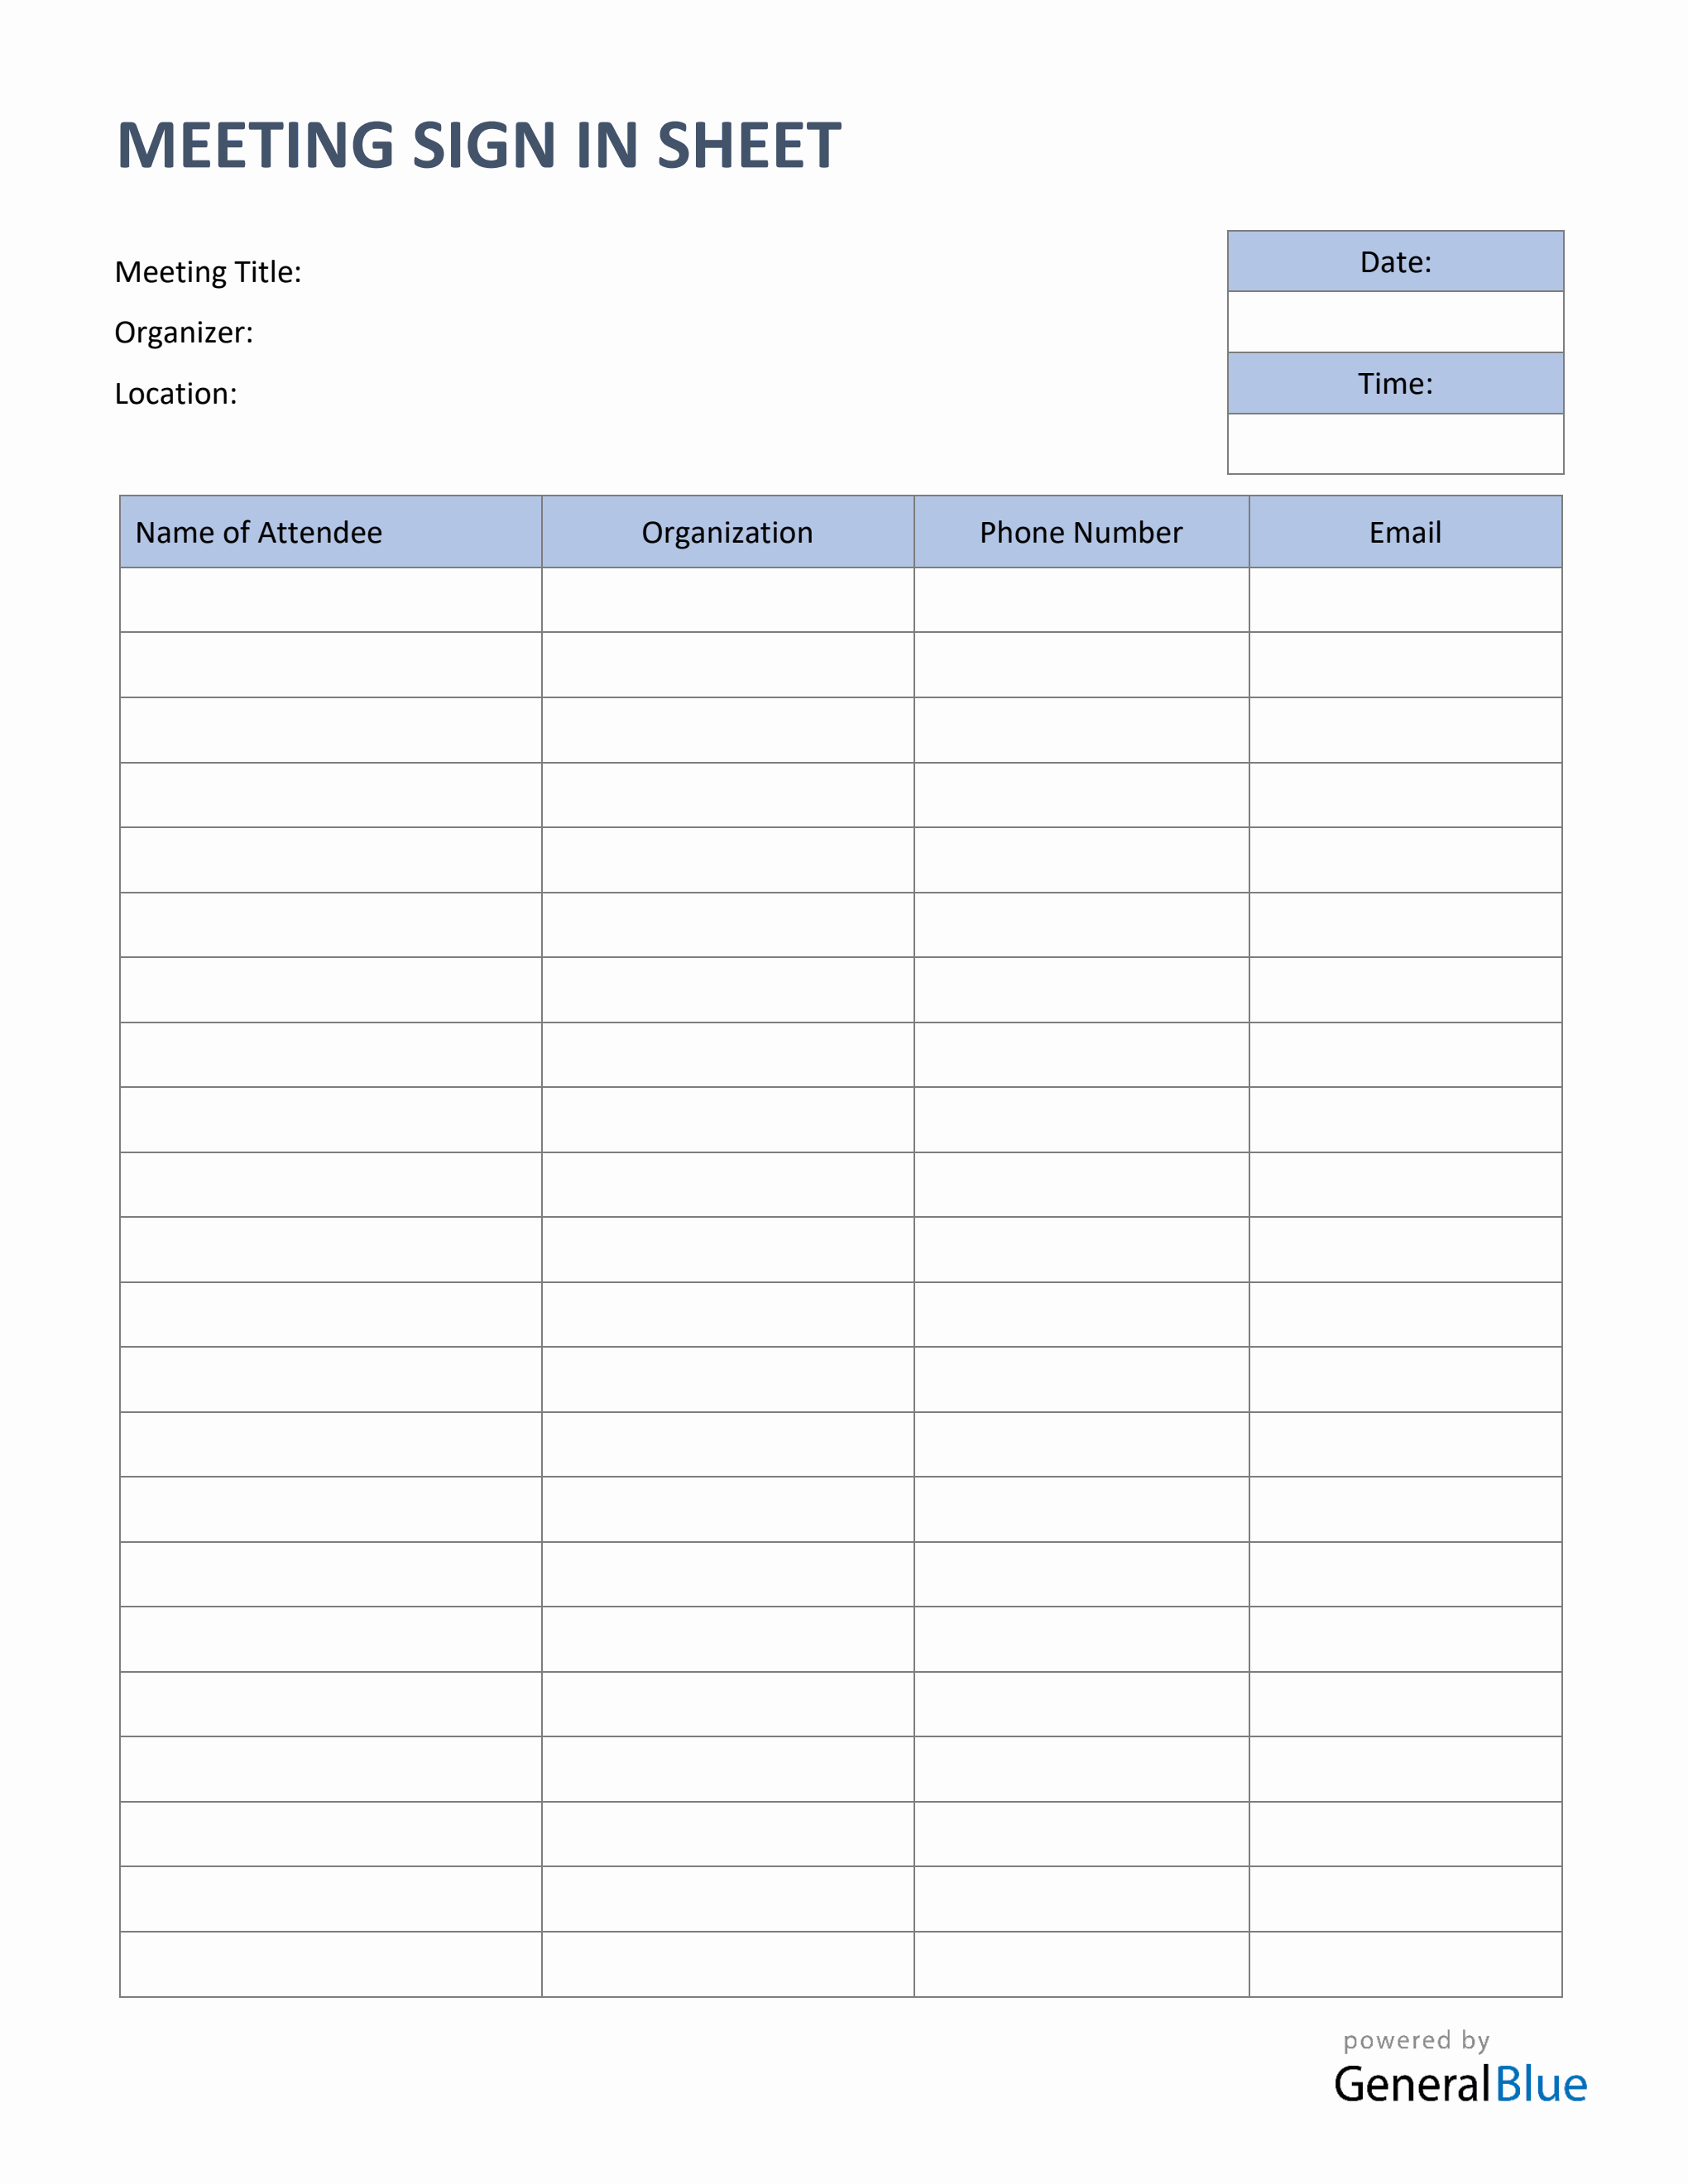 Meeting Sign In Sheet in PDF Inside Meeting Sign In Sheet Template